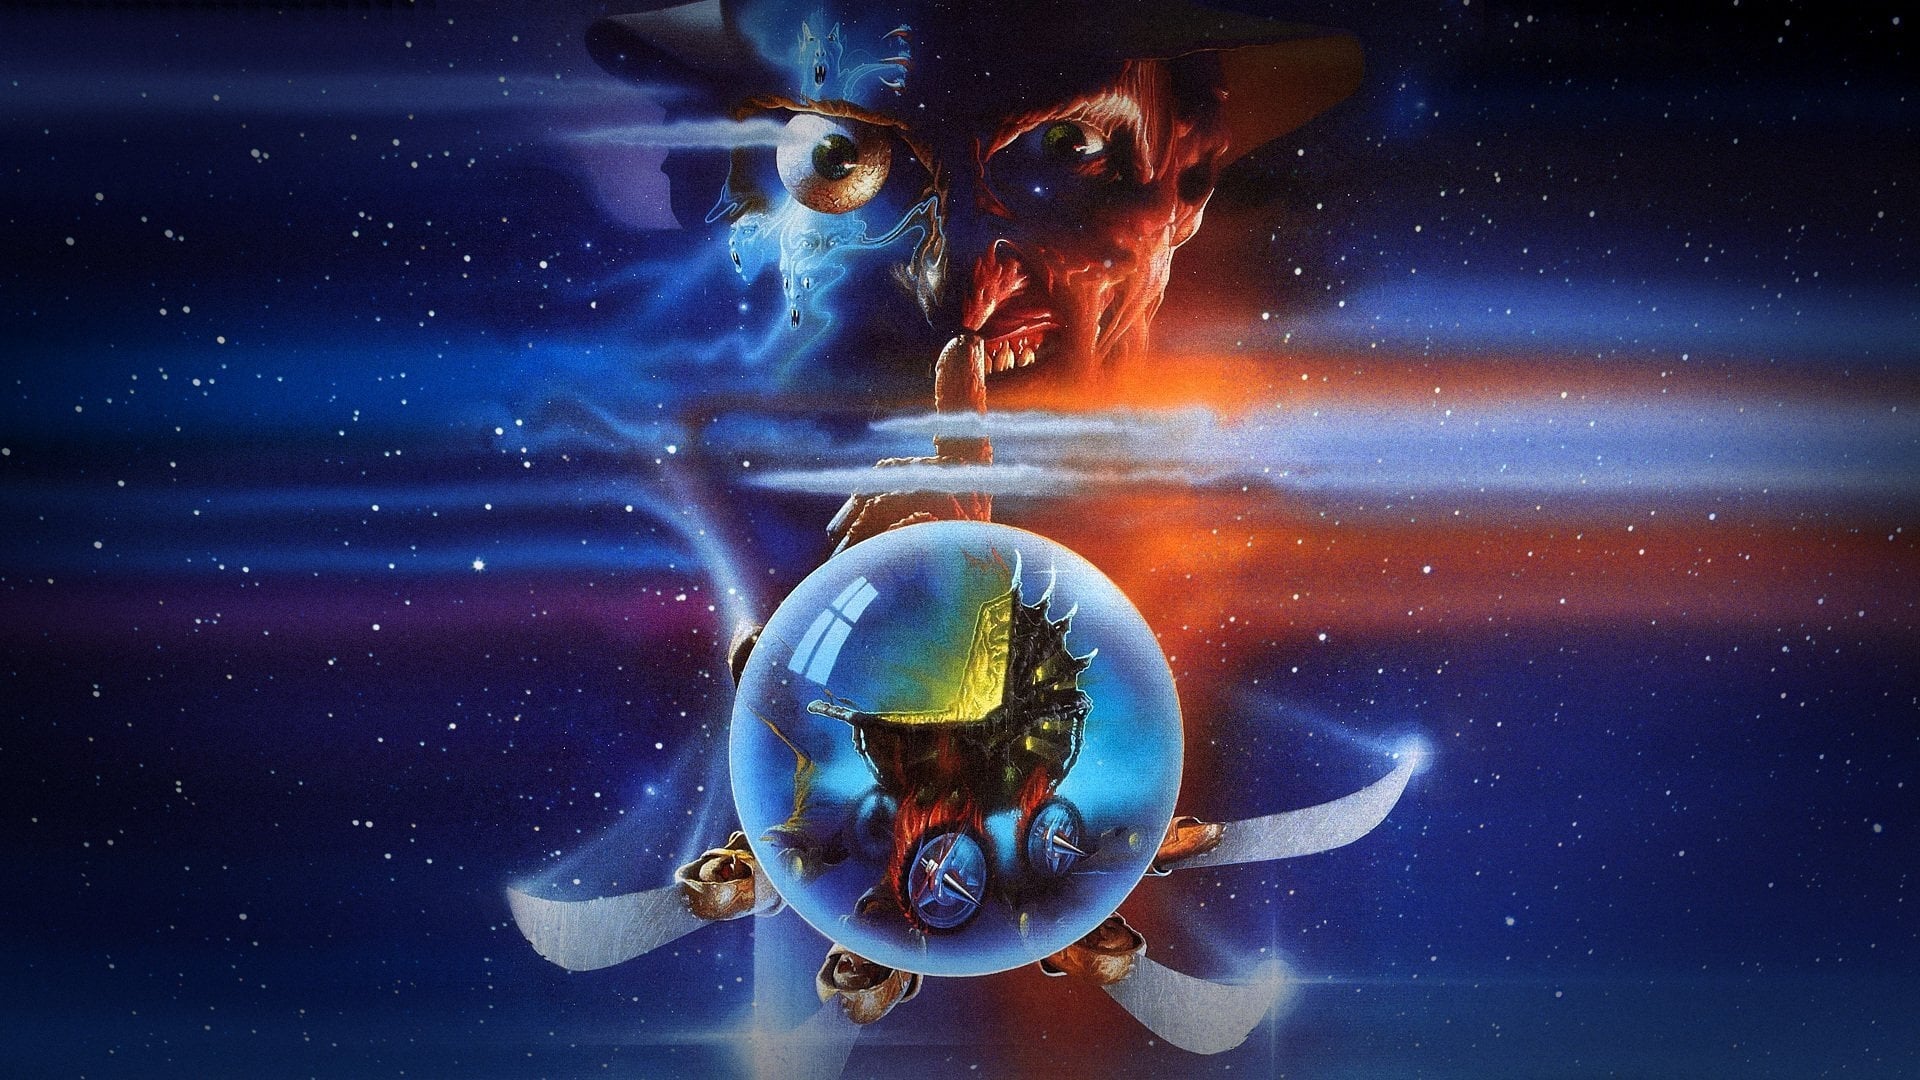 A Nightmare on Elm Street: The Dream Child 1989 Soap2Day